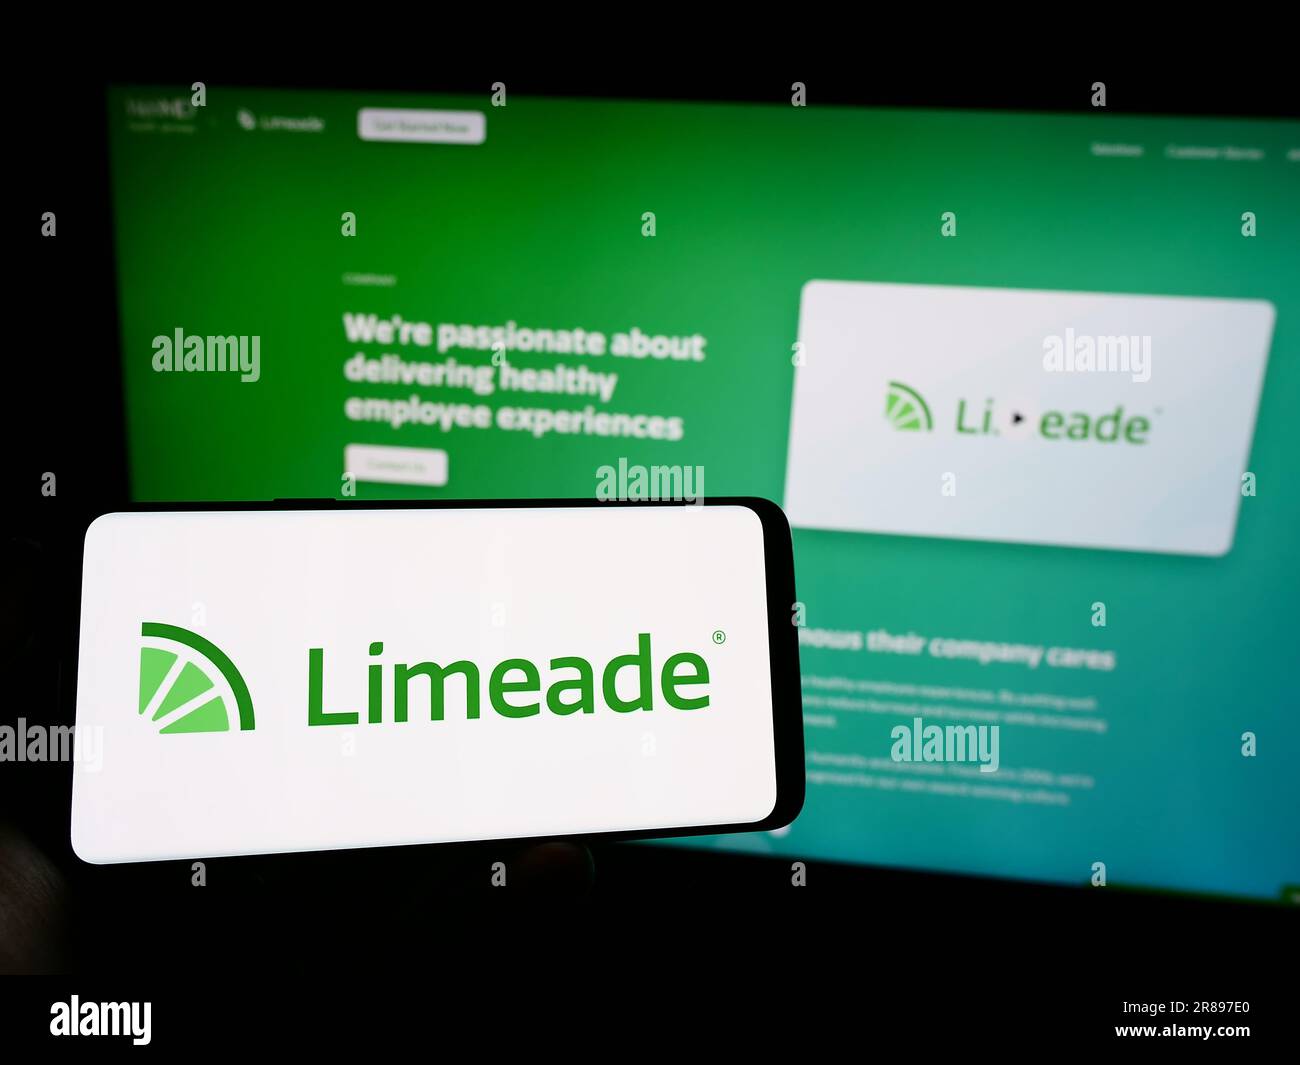 Person holding mobile phone with logo of American employee well-being company Limeade Inc. on screen in front of web page. Focus on phone display. Stock Photo